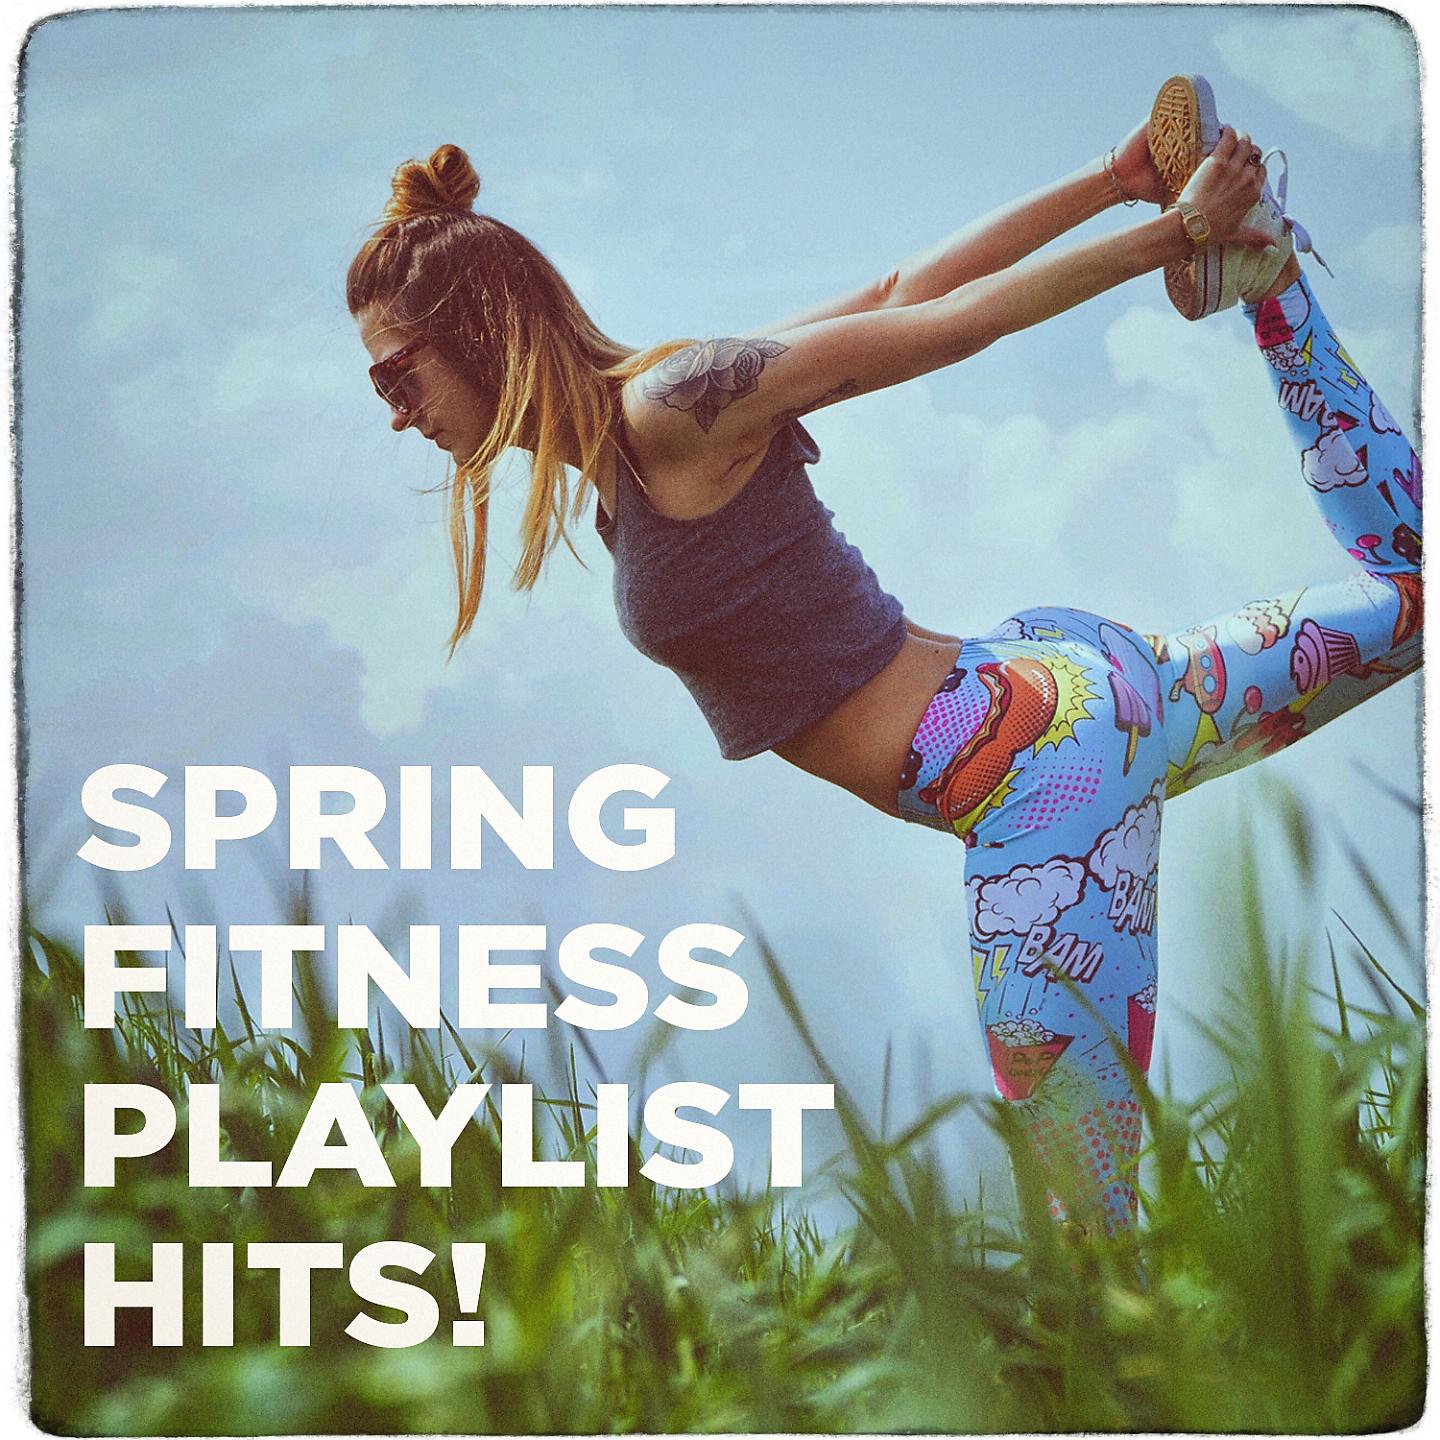 Spring Fitness. CROSSFIT Junkies - New Rules. Spring Fitness Creative. Hits playlist